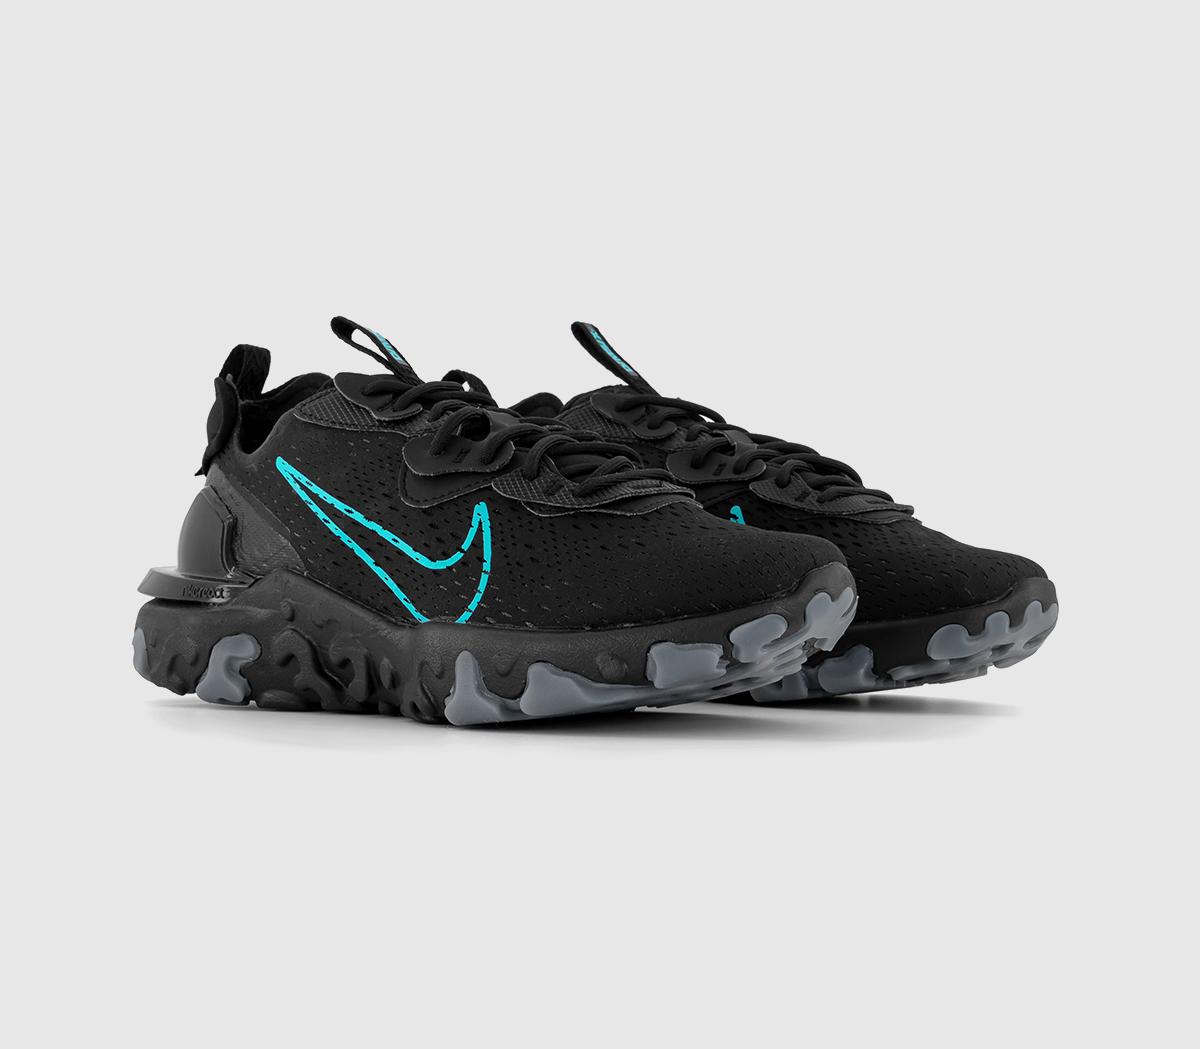 Nike React Vision Trainers Black Dusty Cactus Cool Grey, 10